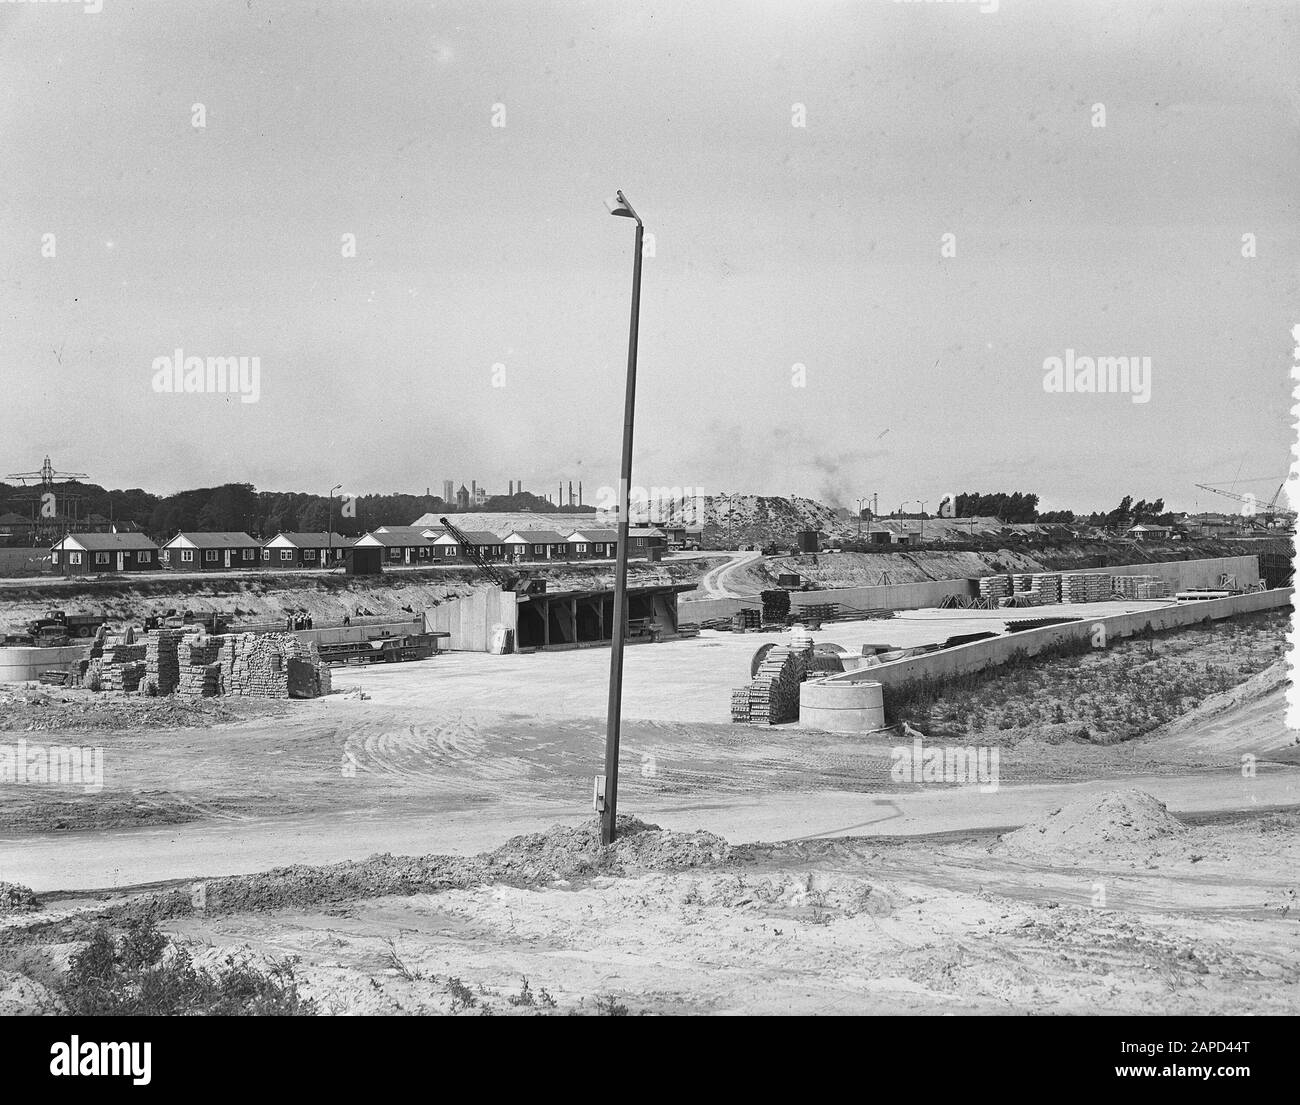 Construction Velser tunnel, tunnel exit with connection to railway Date: August 4, 1955 Keywords: RAILWAYS, TUNNERLINS Name: Velsertunnel Stock Photo